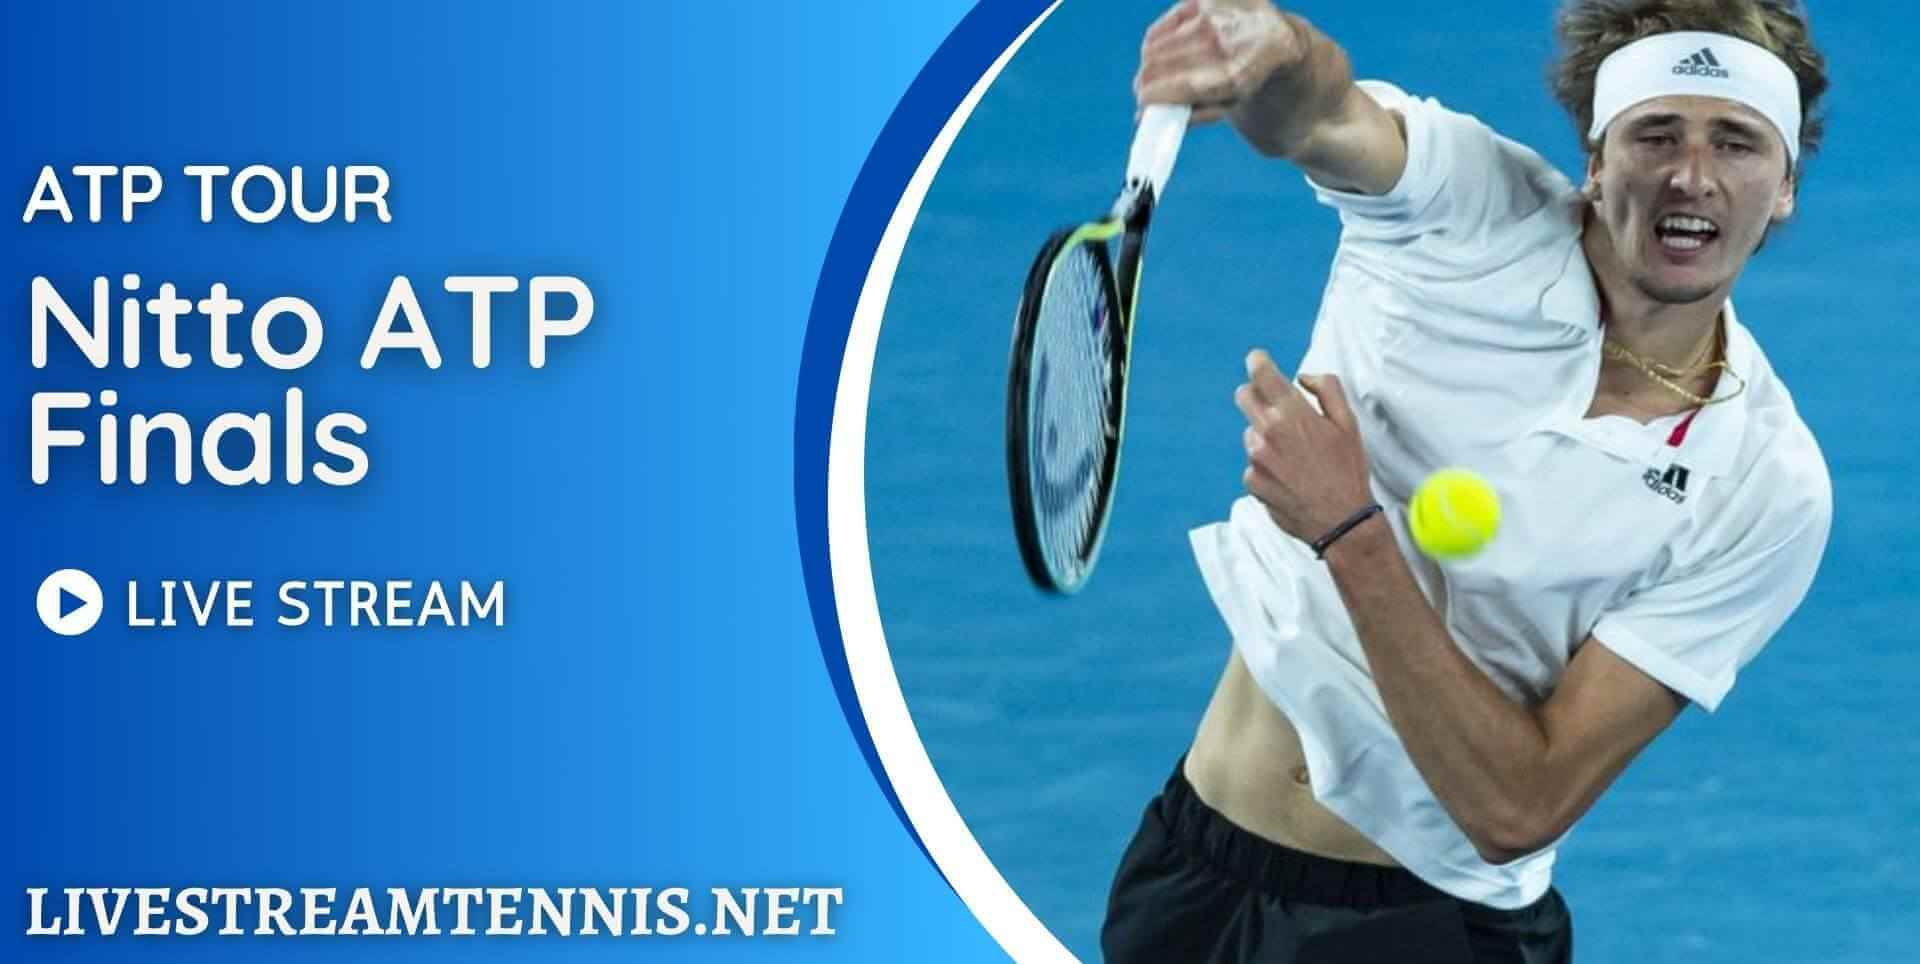 Nitto ATP Finals Live Streaming